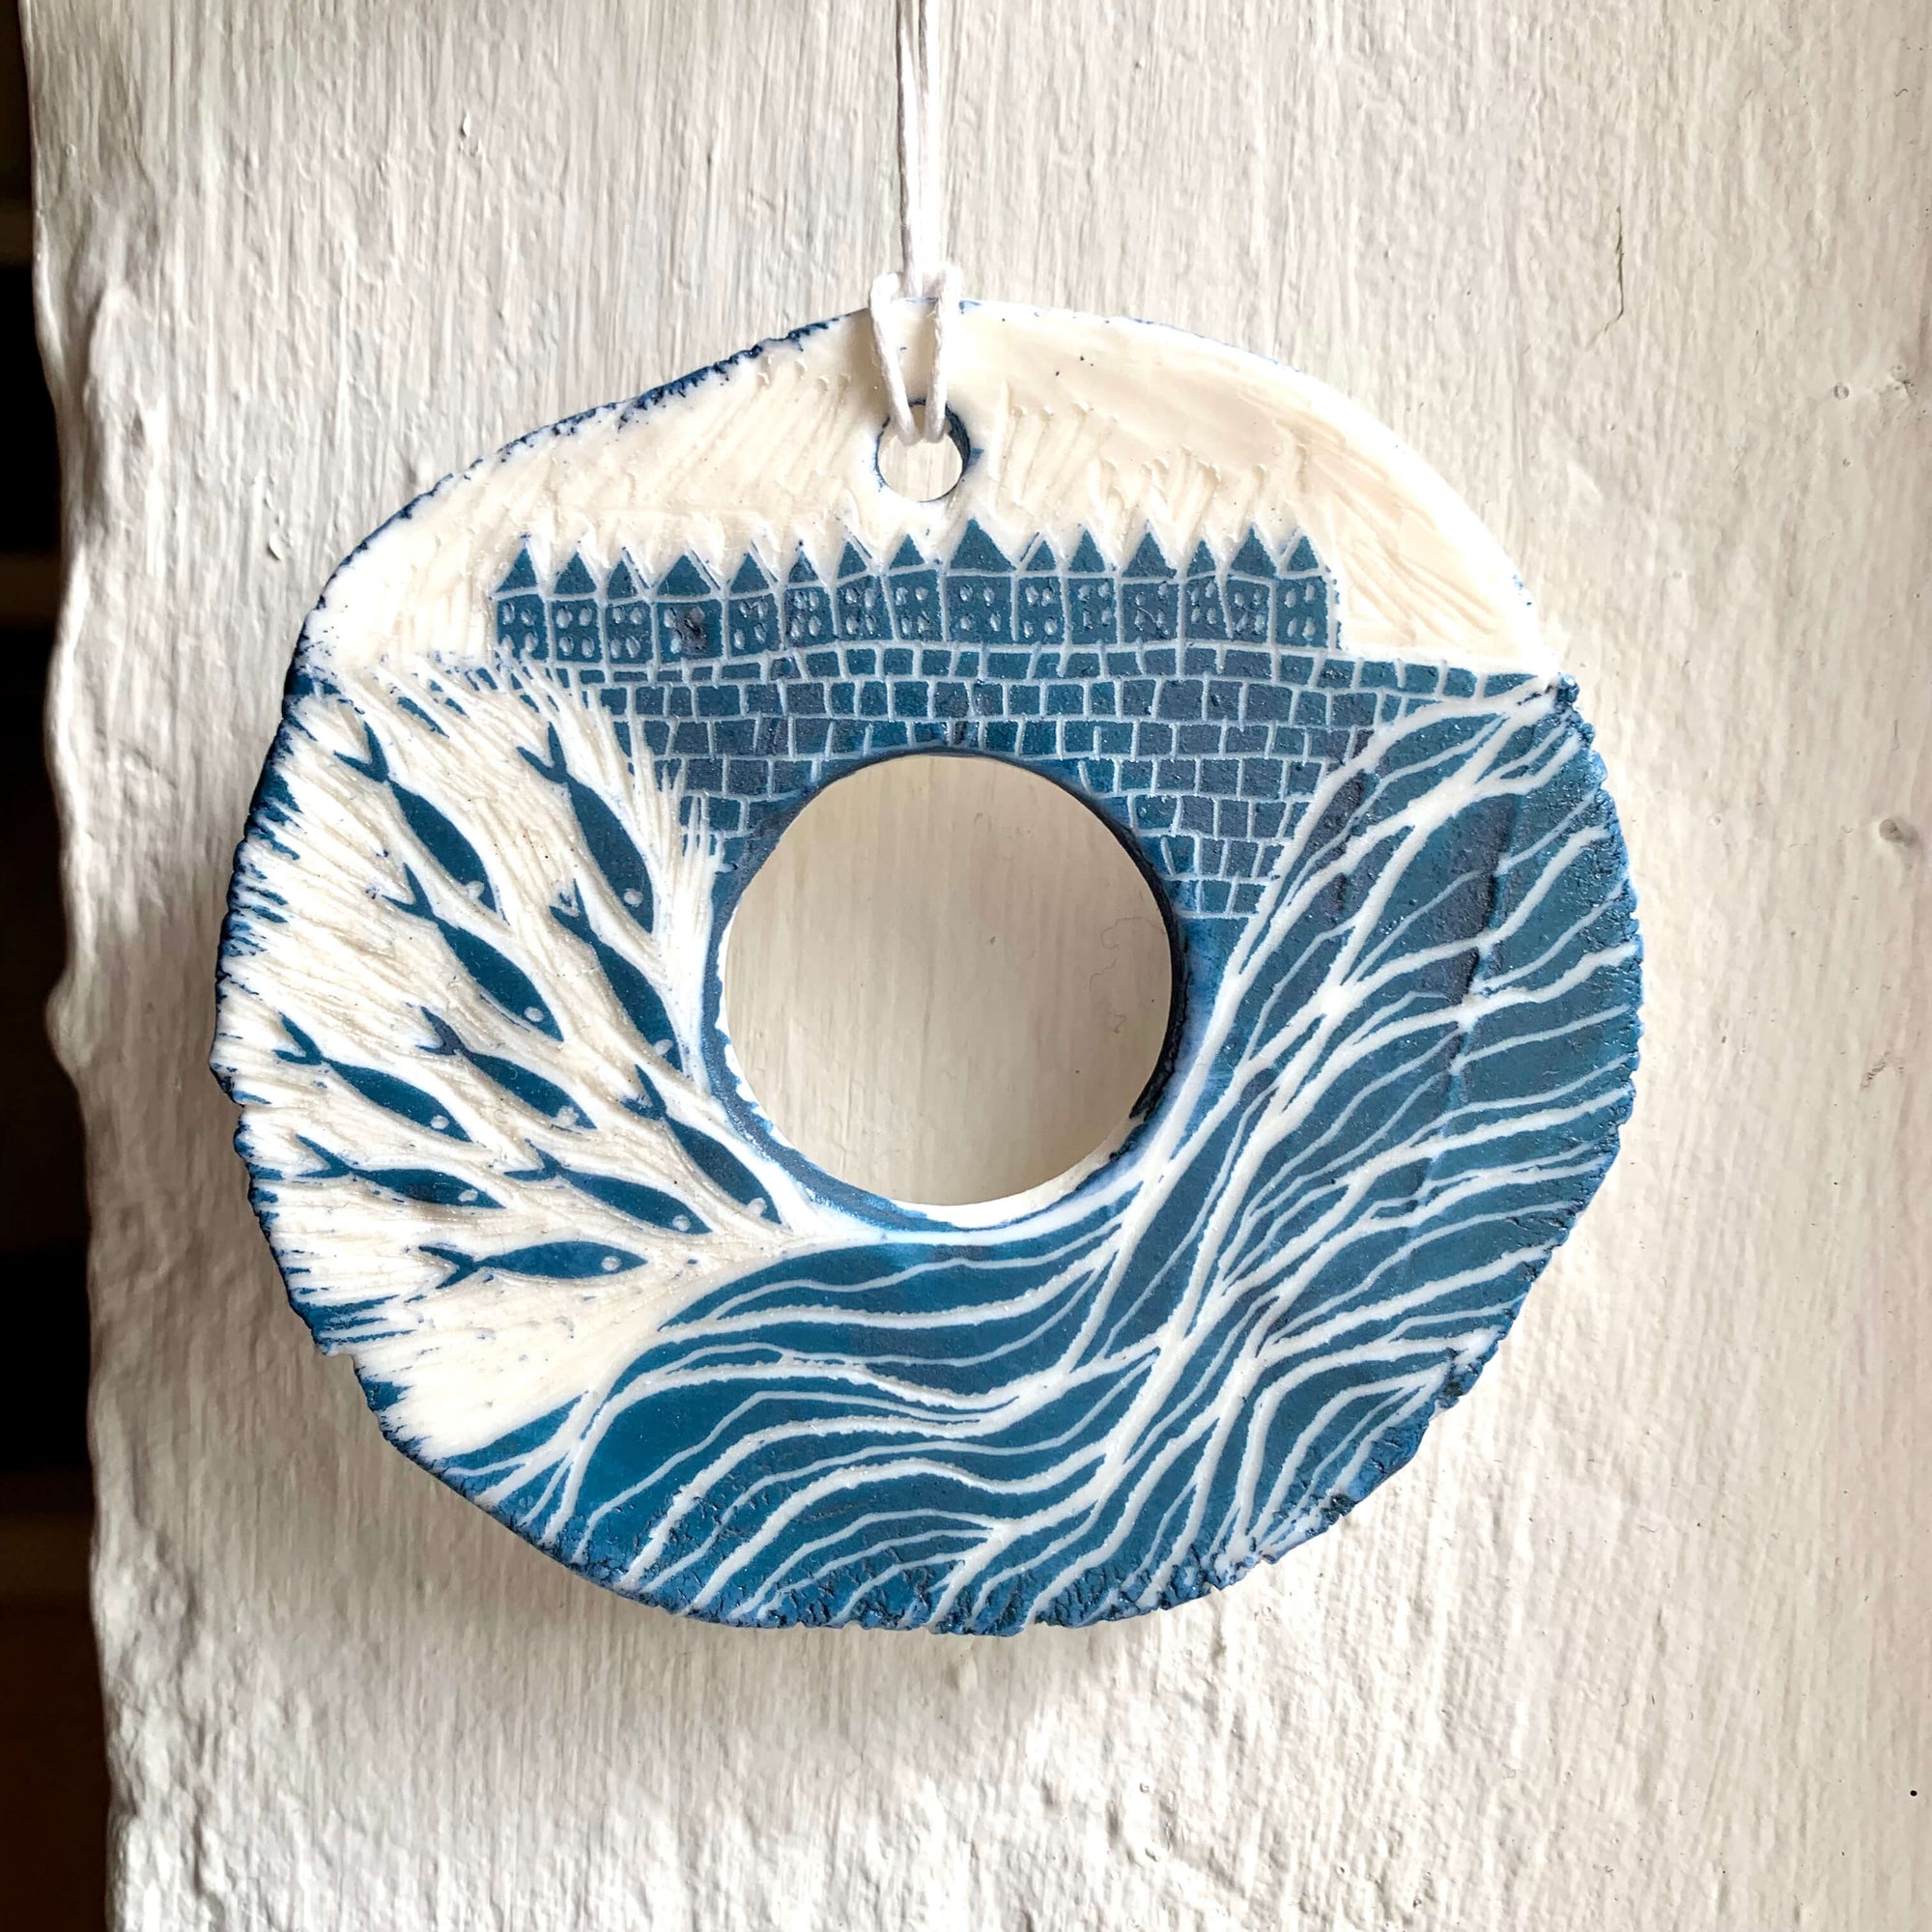 Handcrafted by Sarah Livingstone. White and blue porcelain rough circular shaped hanging, with a hole in the middle and abstract waves, fishes and small buildings carved into it.